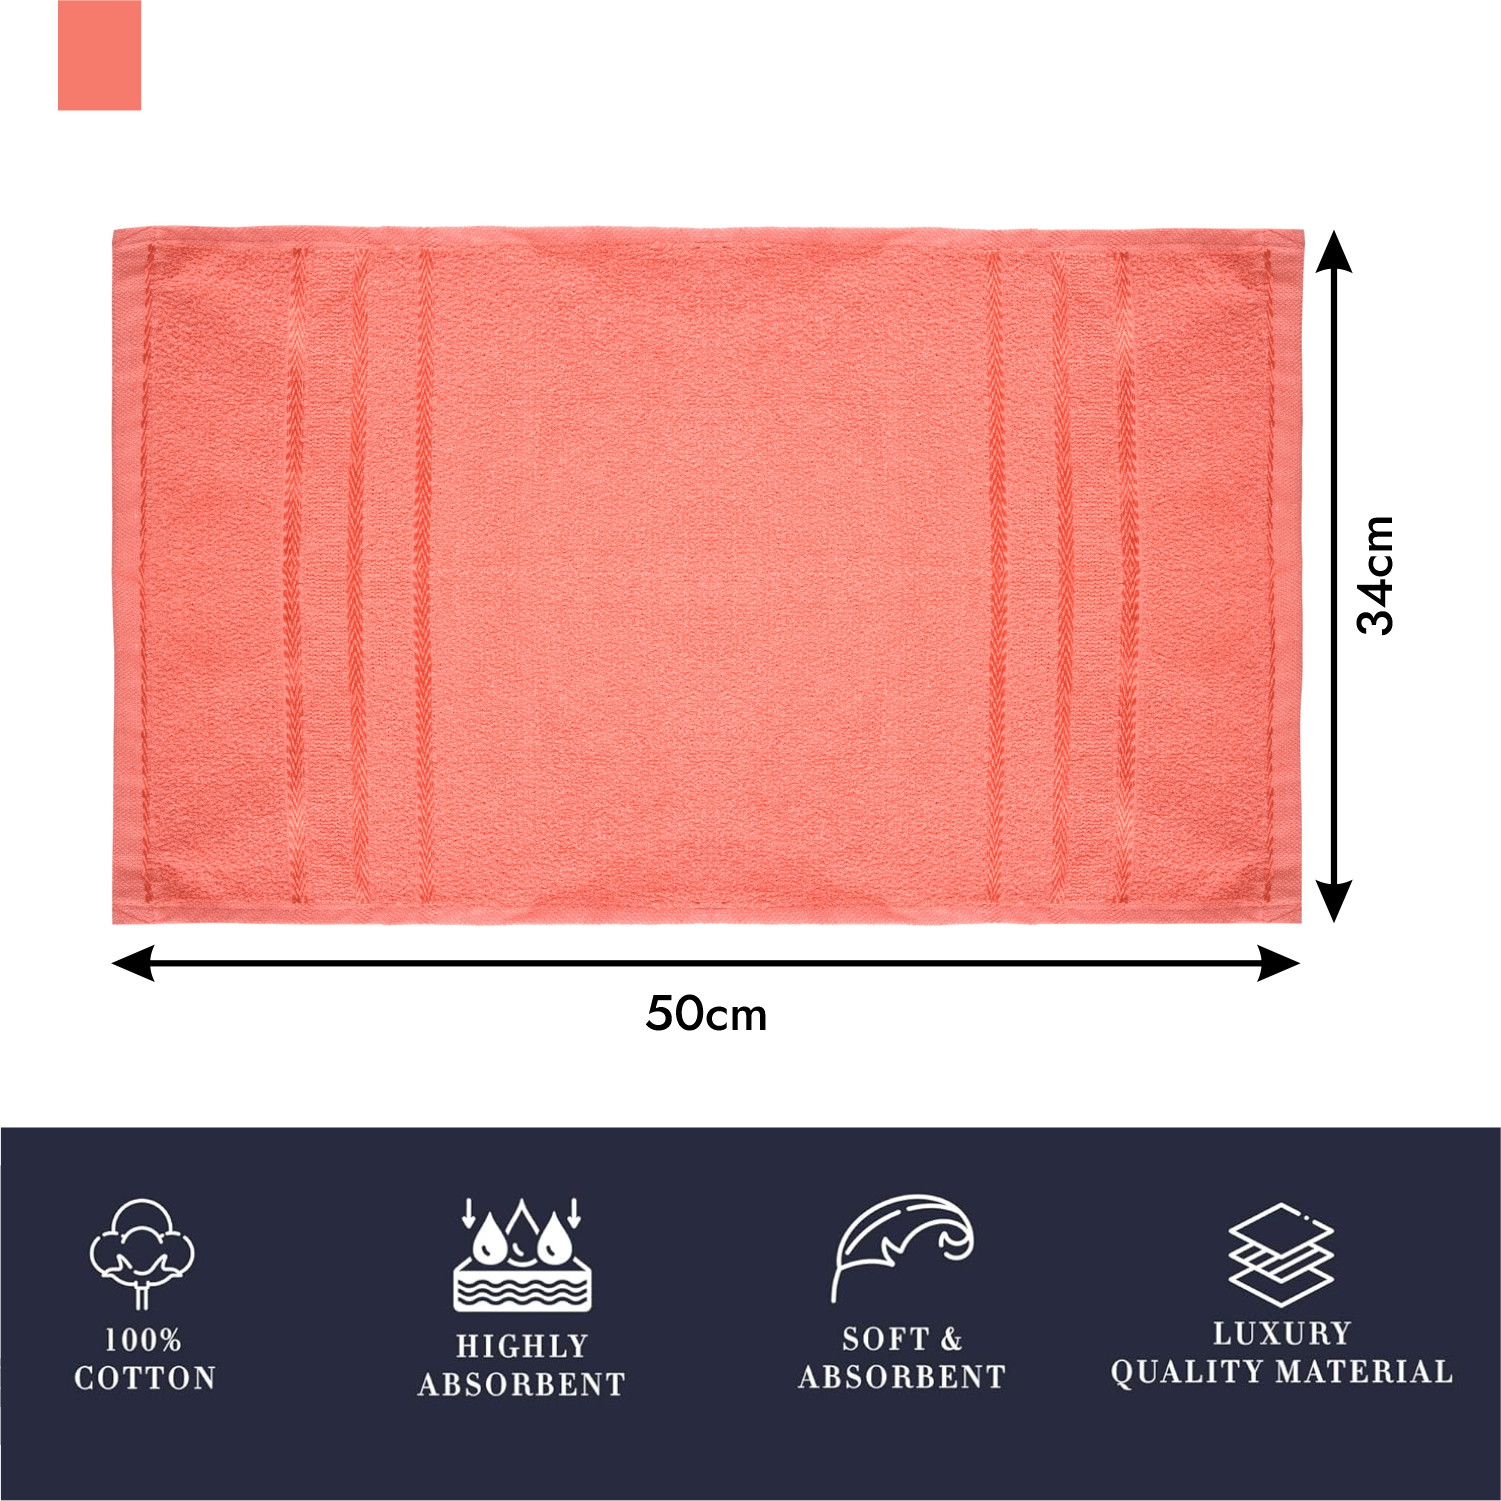 Kuber Industries Face Towel | Towels for Facewash | Towels for Gym | Facewash for Travel | Towels for Daily use | Workout Hand Towel | Lining Design | 14x21 Inch| Orange